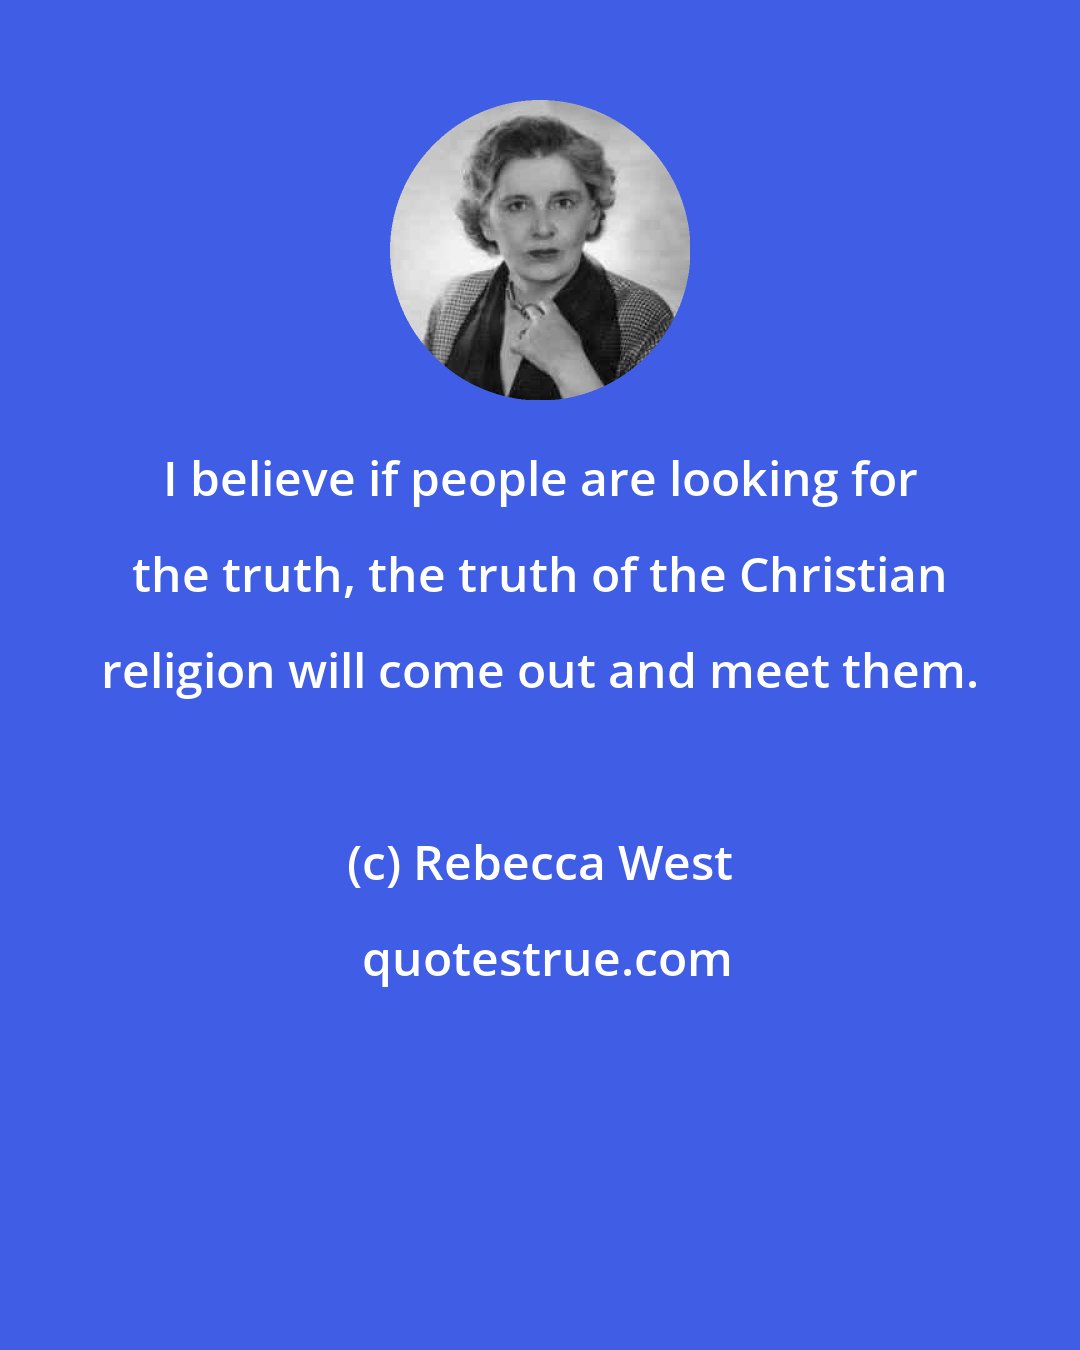 Rebecca West: I believe if people are looking for the truth, the truth of the Christian religion will come out and meet them.